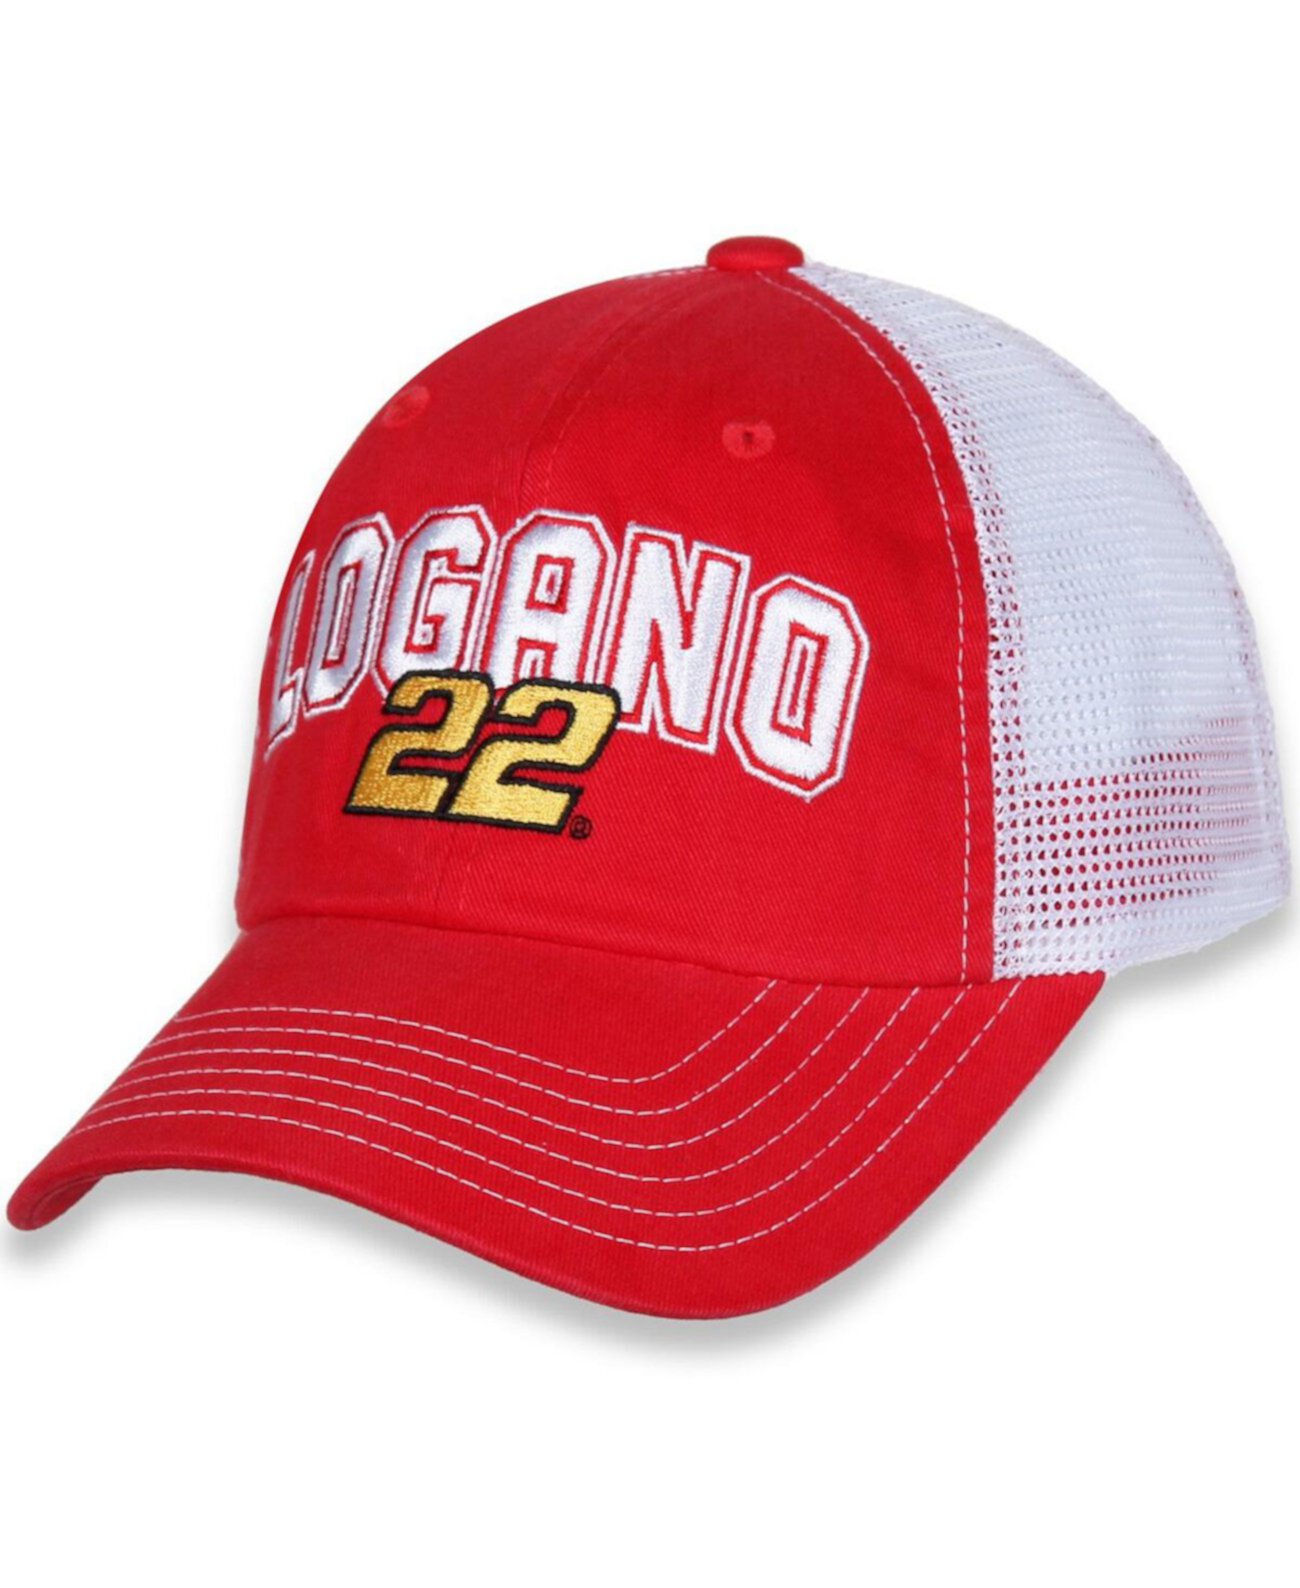 Women's Red, White Joey Logano Name and Number Adjustable Hat Team Penske